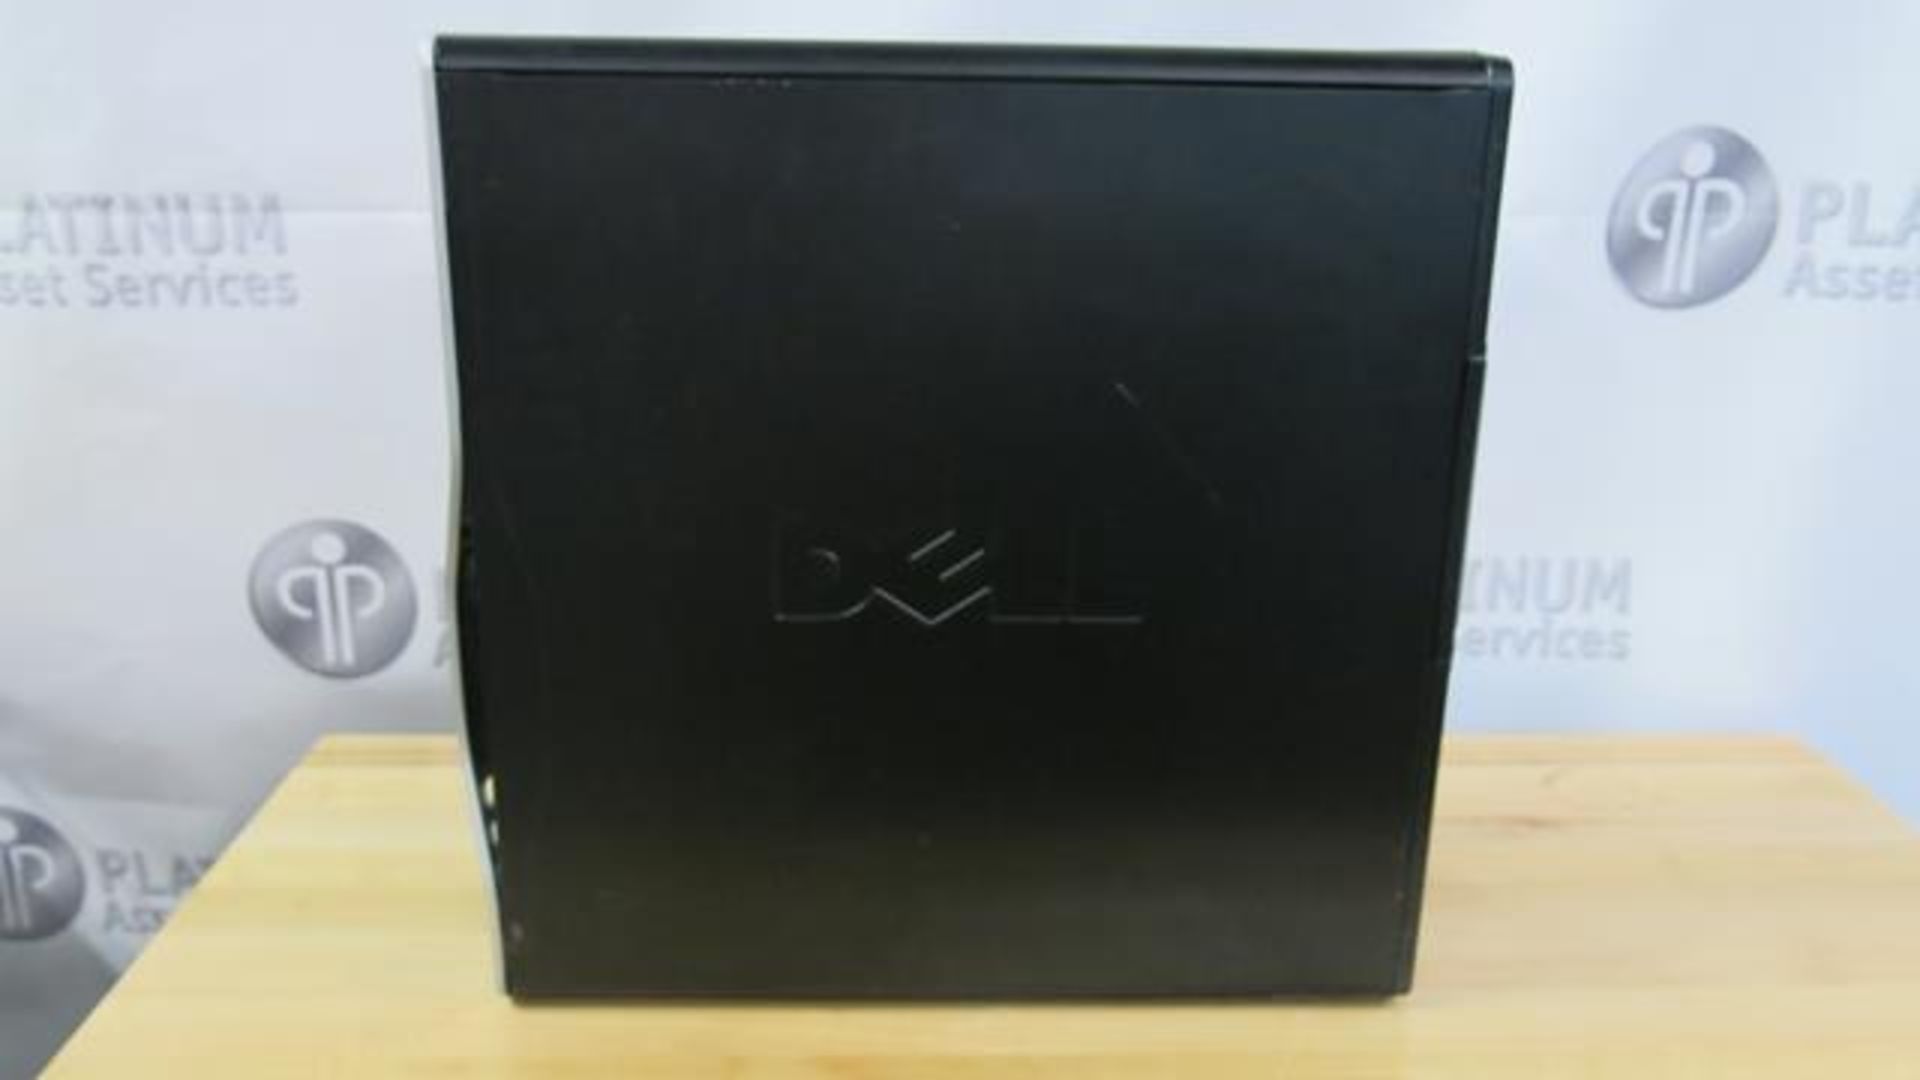 DELL, PRECISION T3500, DESKTOP WORKSTATION (UNIT DOES NOT BOOT UP) (TAG#22) - Image 3 of 5